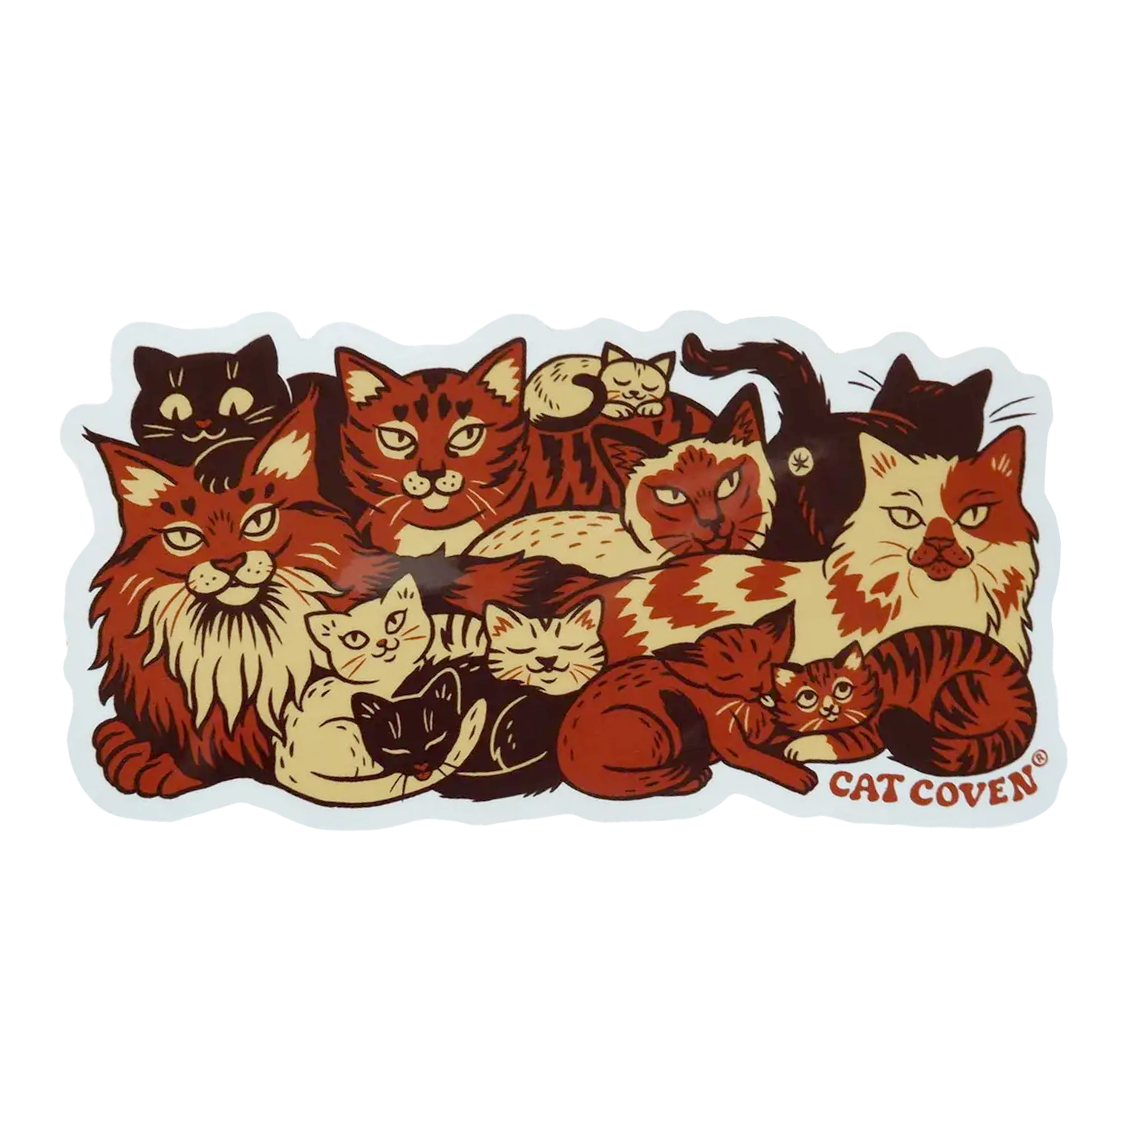 CAT COVEN CLUTTER OF CATS STICKER